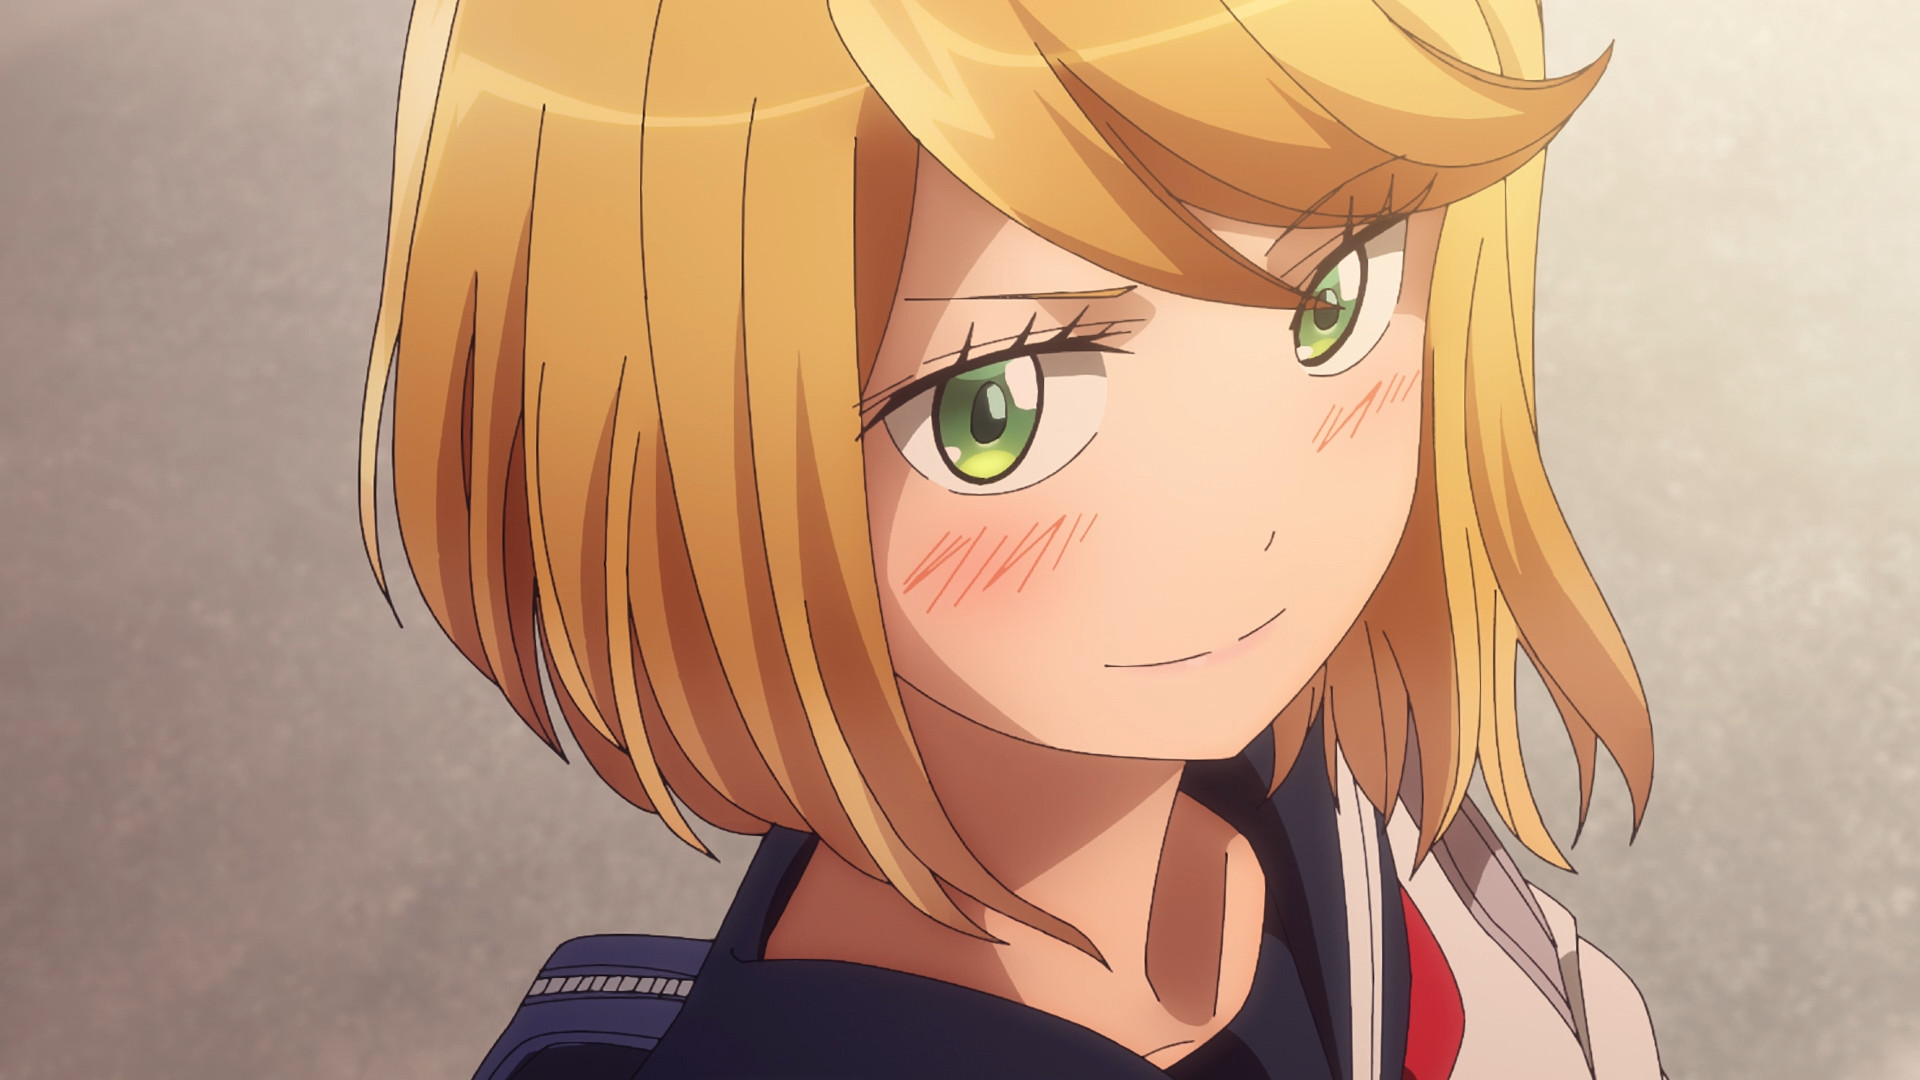 Which Anime Character Do You Resemble, Based On Your Personality -  Waifuworld